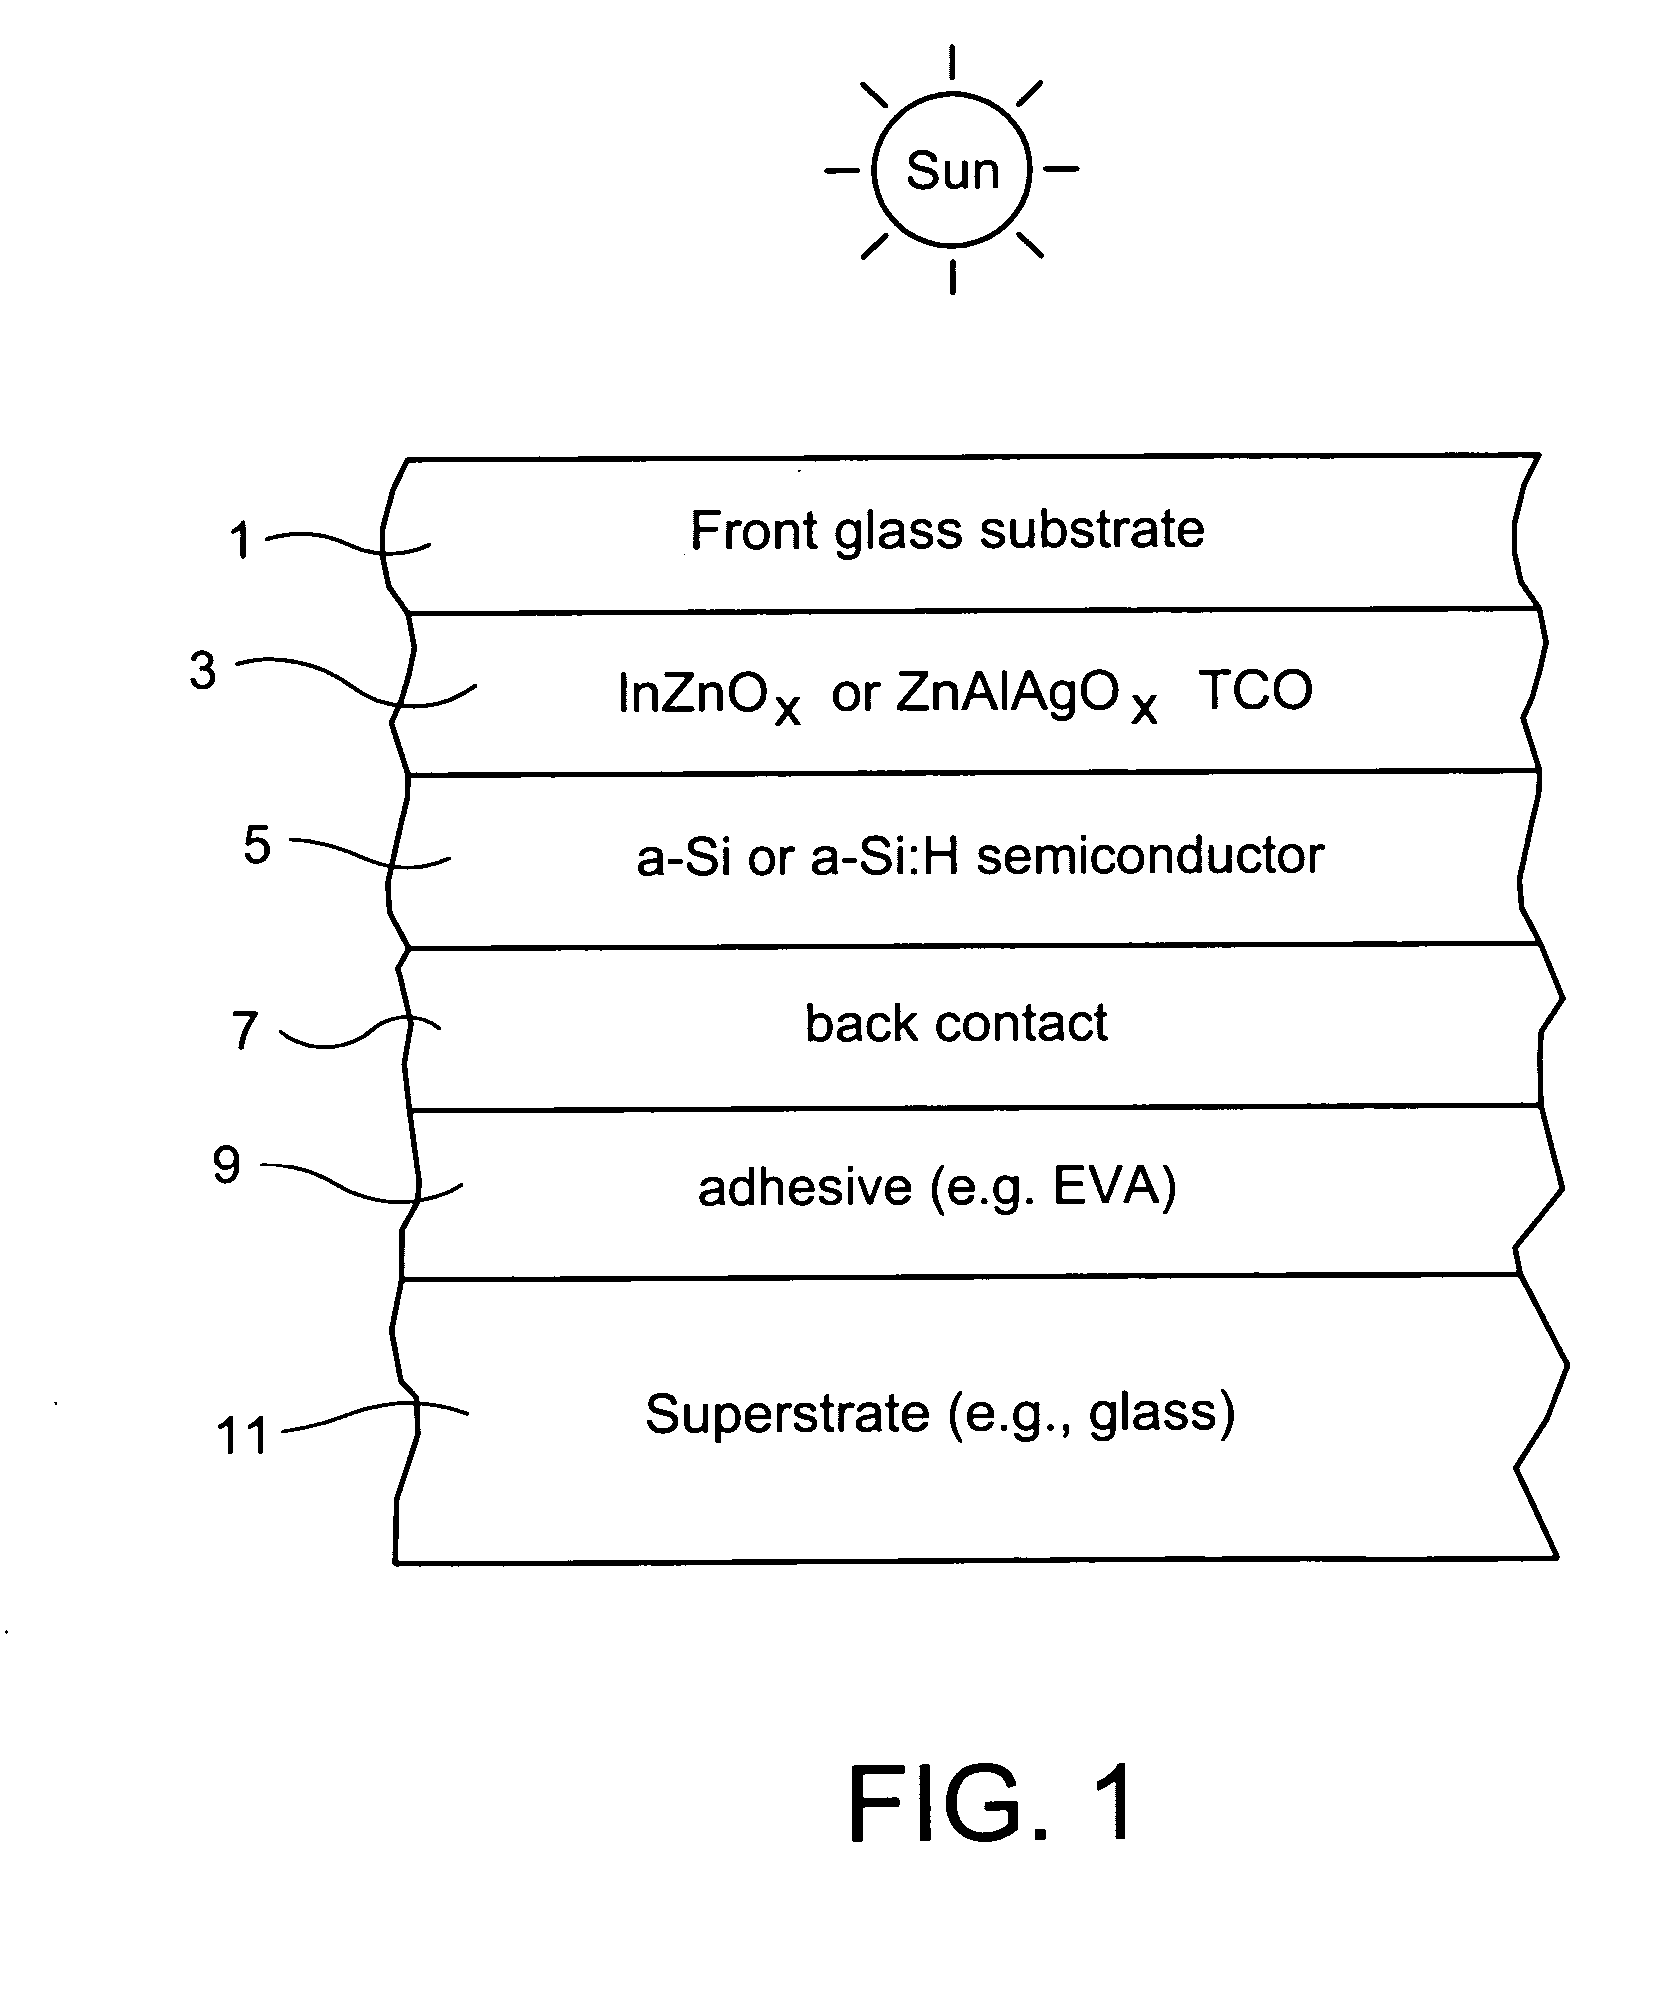 Indium zinc oxide based front contact for photovoltaic device and method of making same